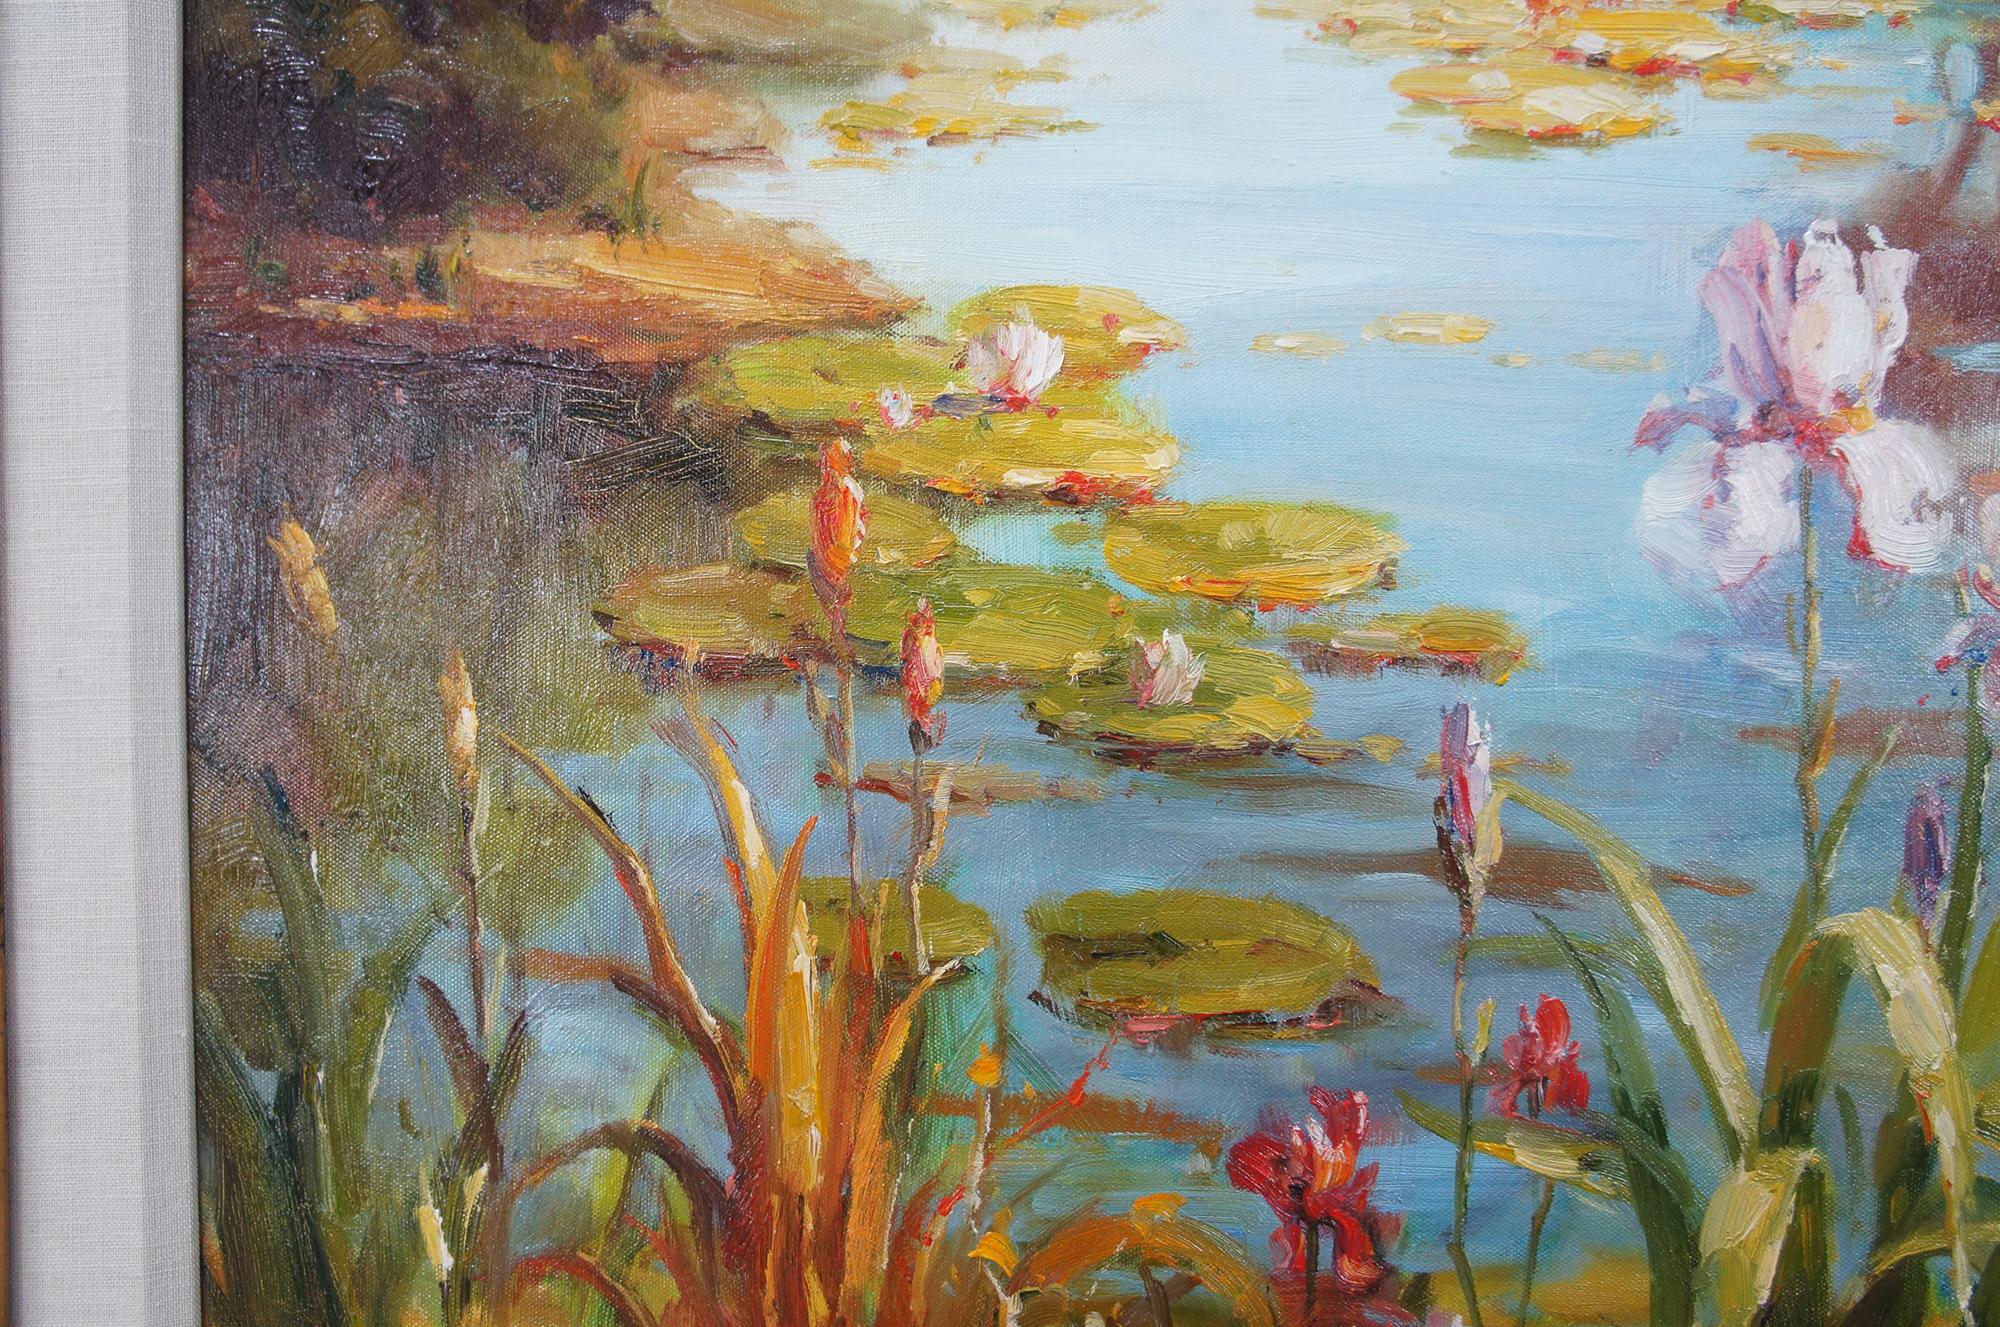 Original Oil Painting on Canvas Lake Scene Water Lily Floral Marsh Realism 47